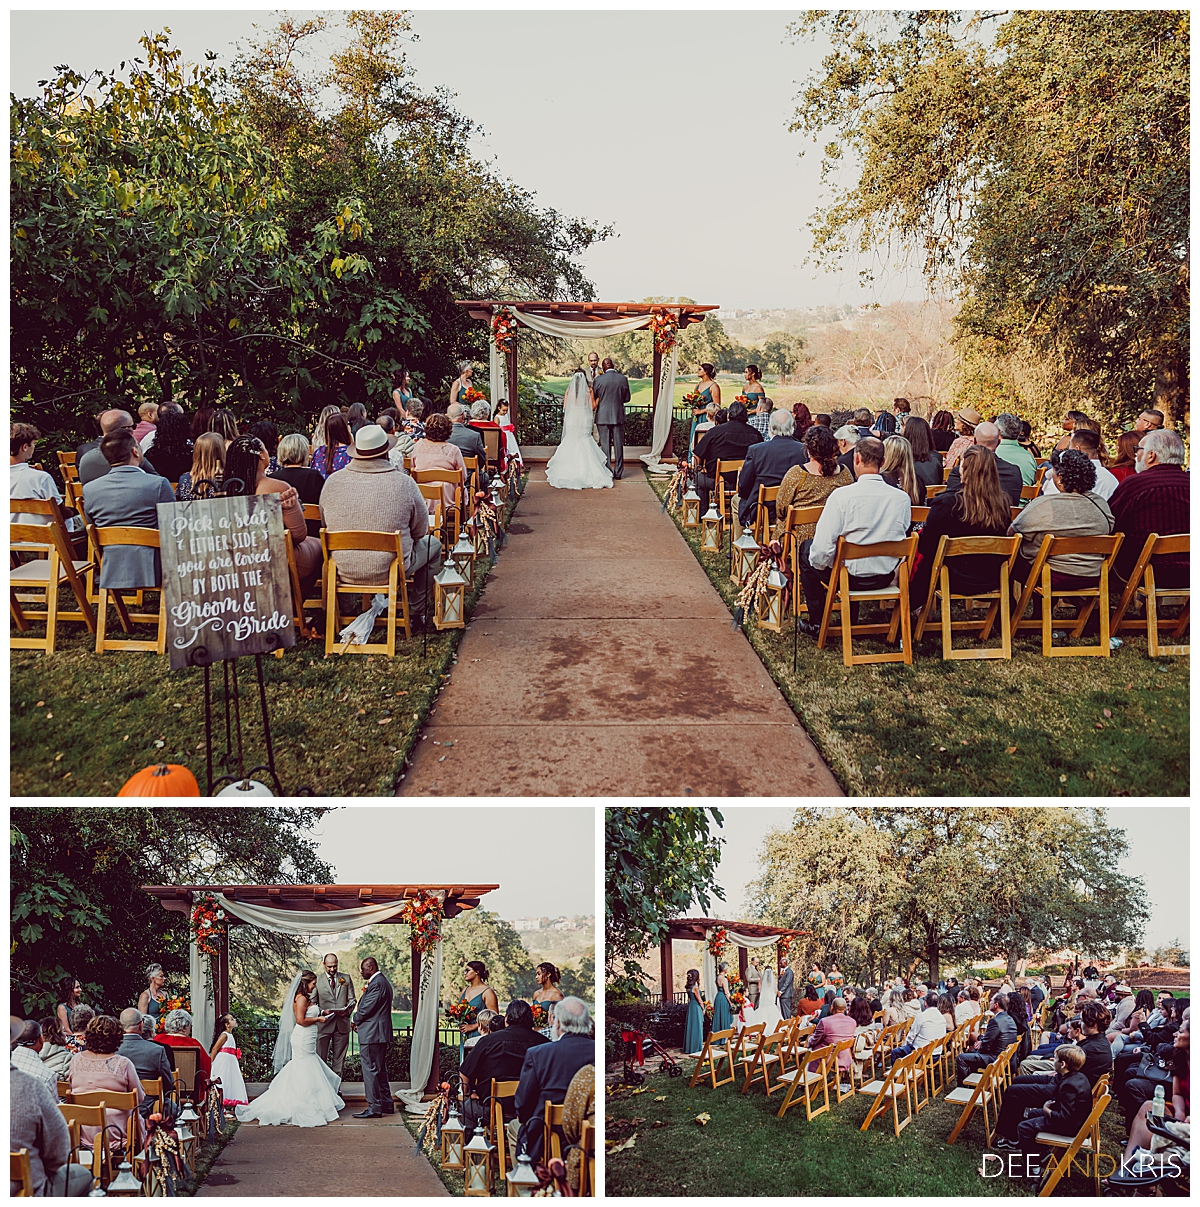 Three images: Top pull back image from rear of aisle looking at couple and guests from behind. Bottom left image head on of bride reading vows. Bottom right image from side of groom reading vows as guests watch.